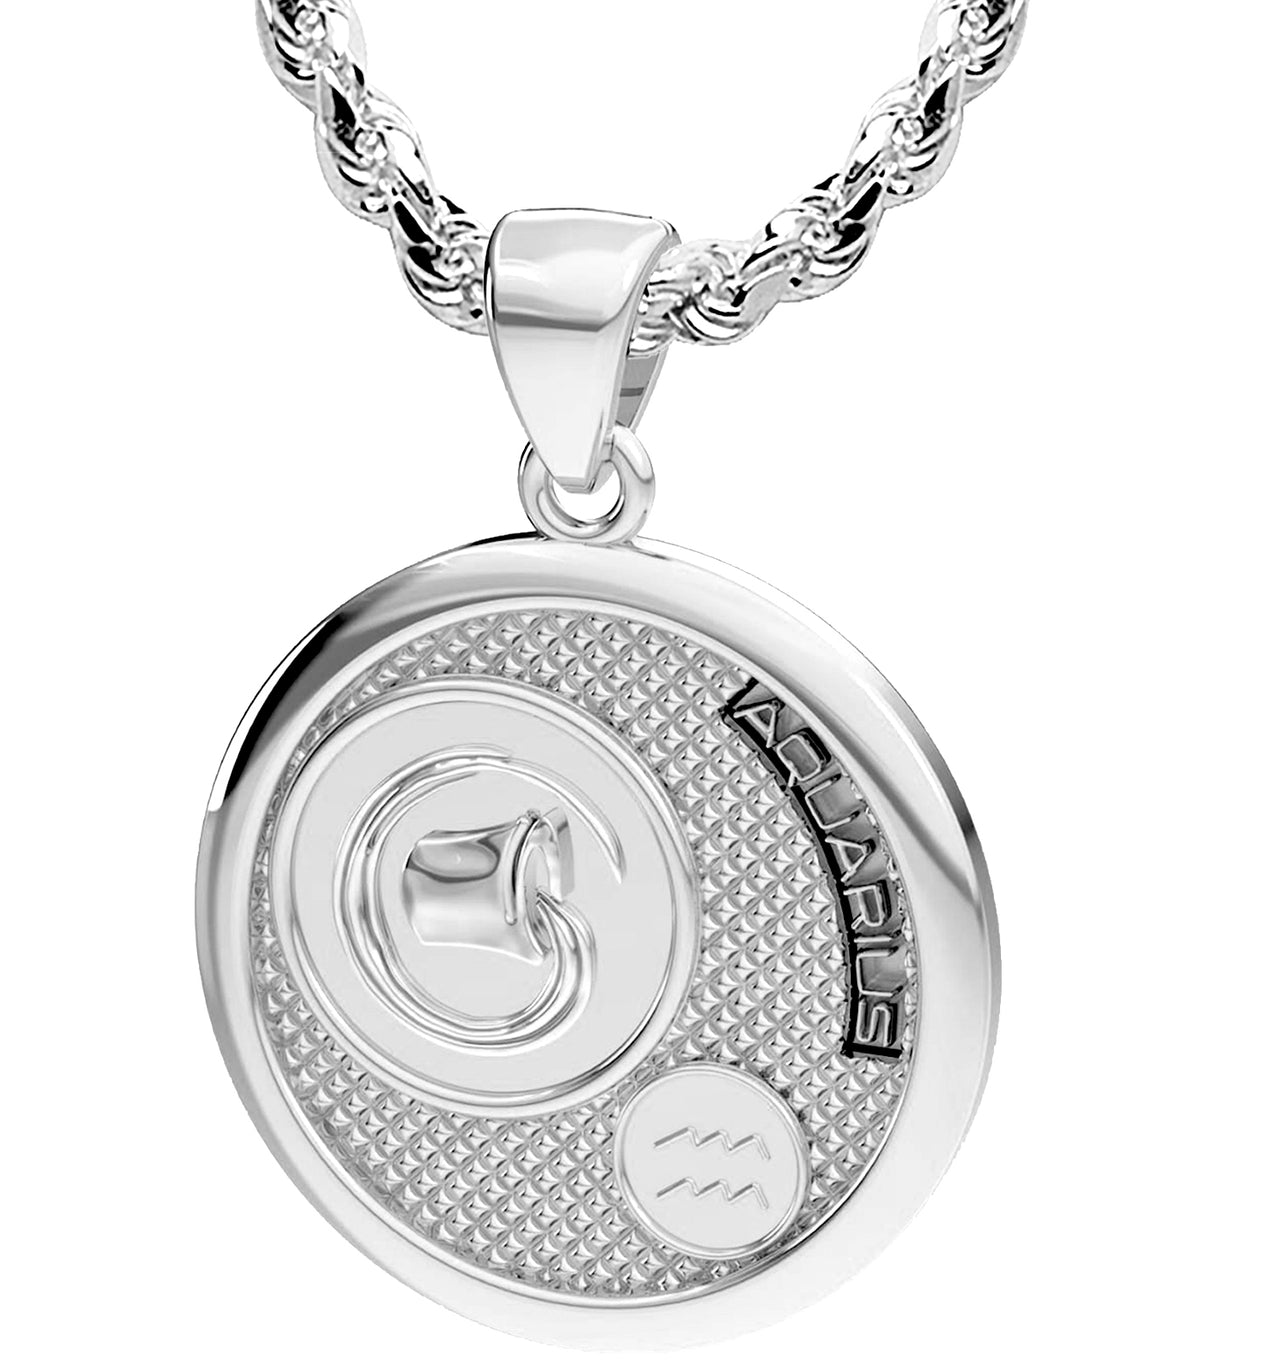 Men's 925 Sterling Silver Round Aquarius Zodiac Polished Finish Pendant Necklace, 33mm